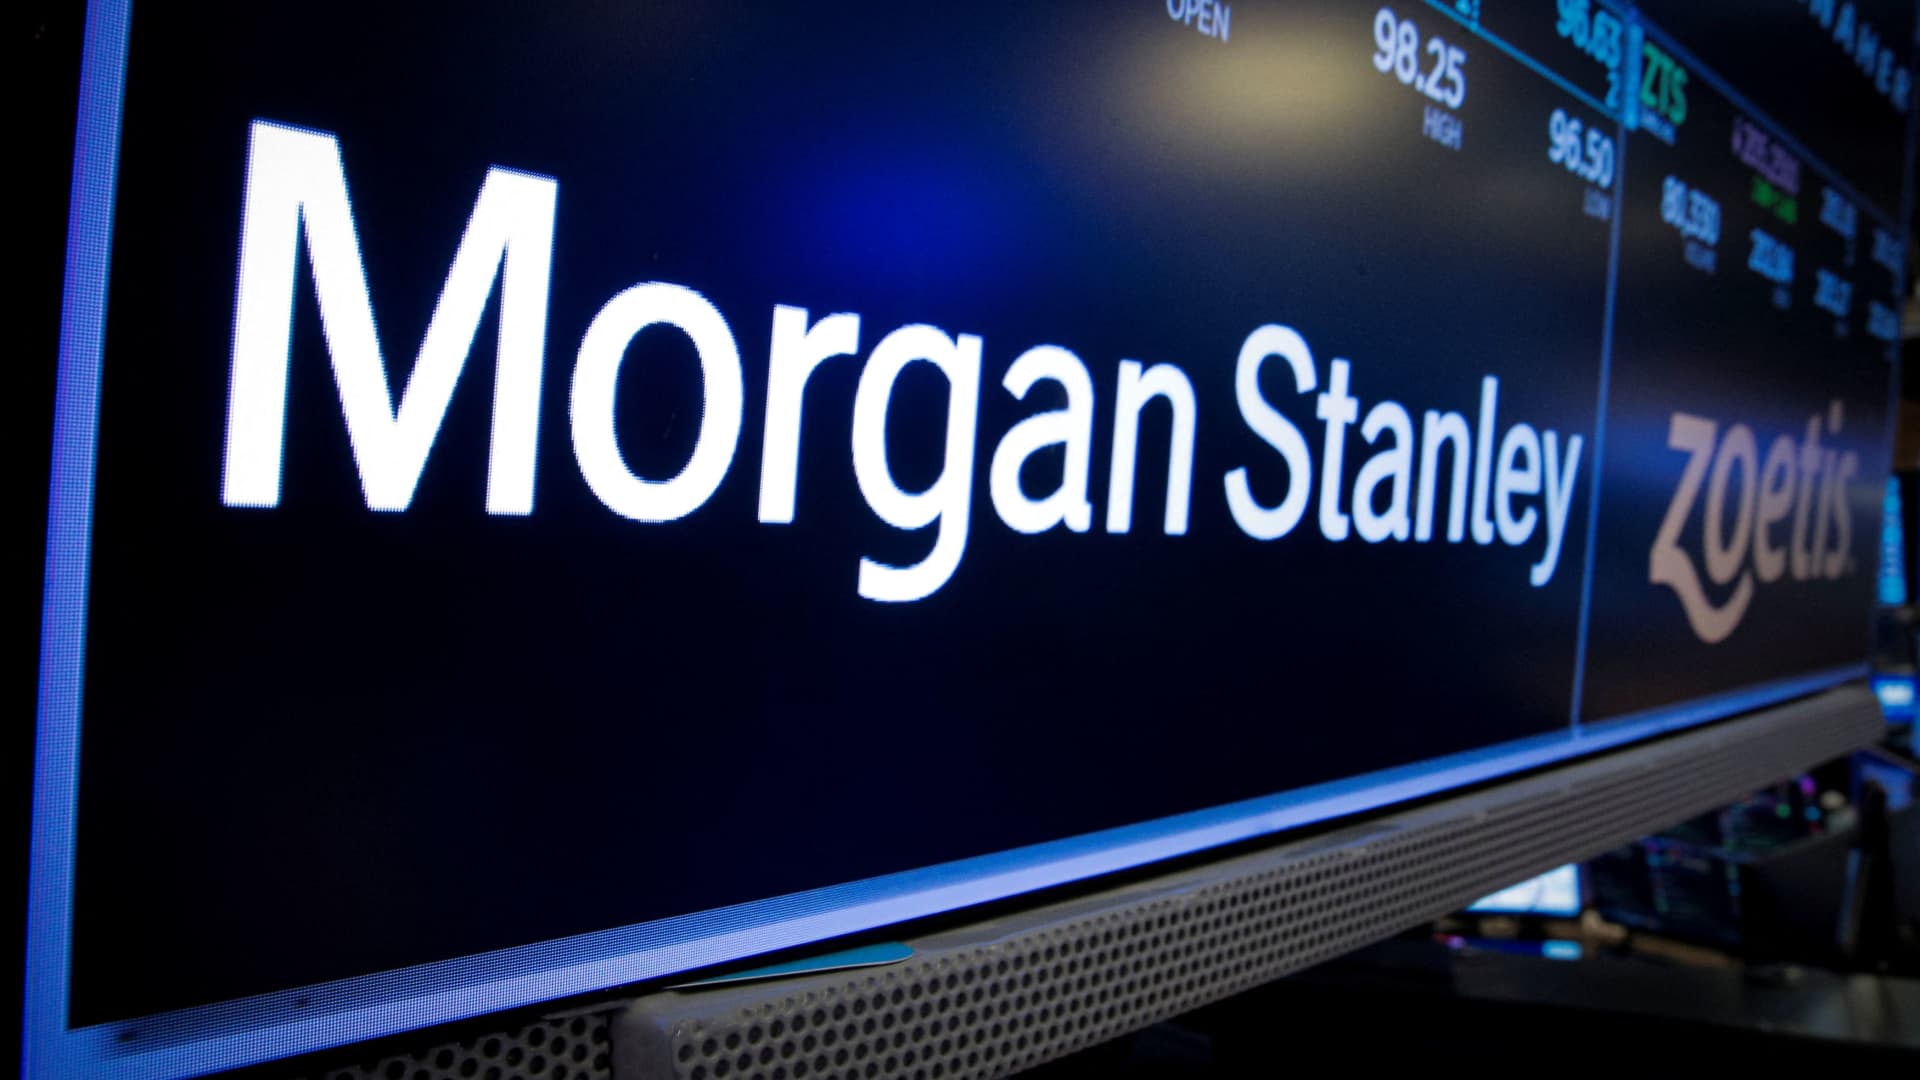 Morgan Stanley’s earnings top Wall Street expectations, helped by record wealth management revenue